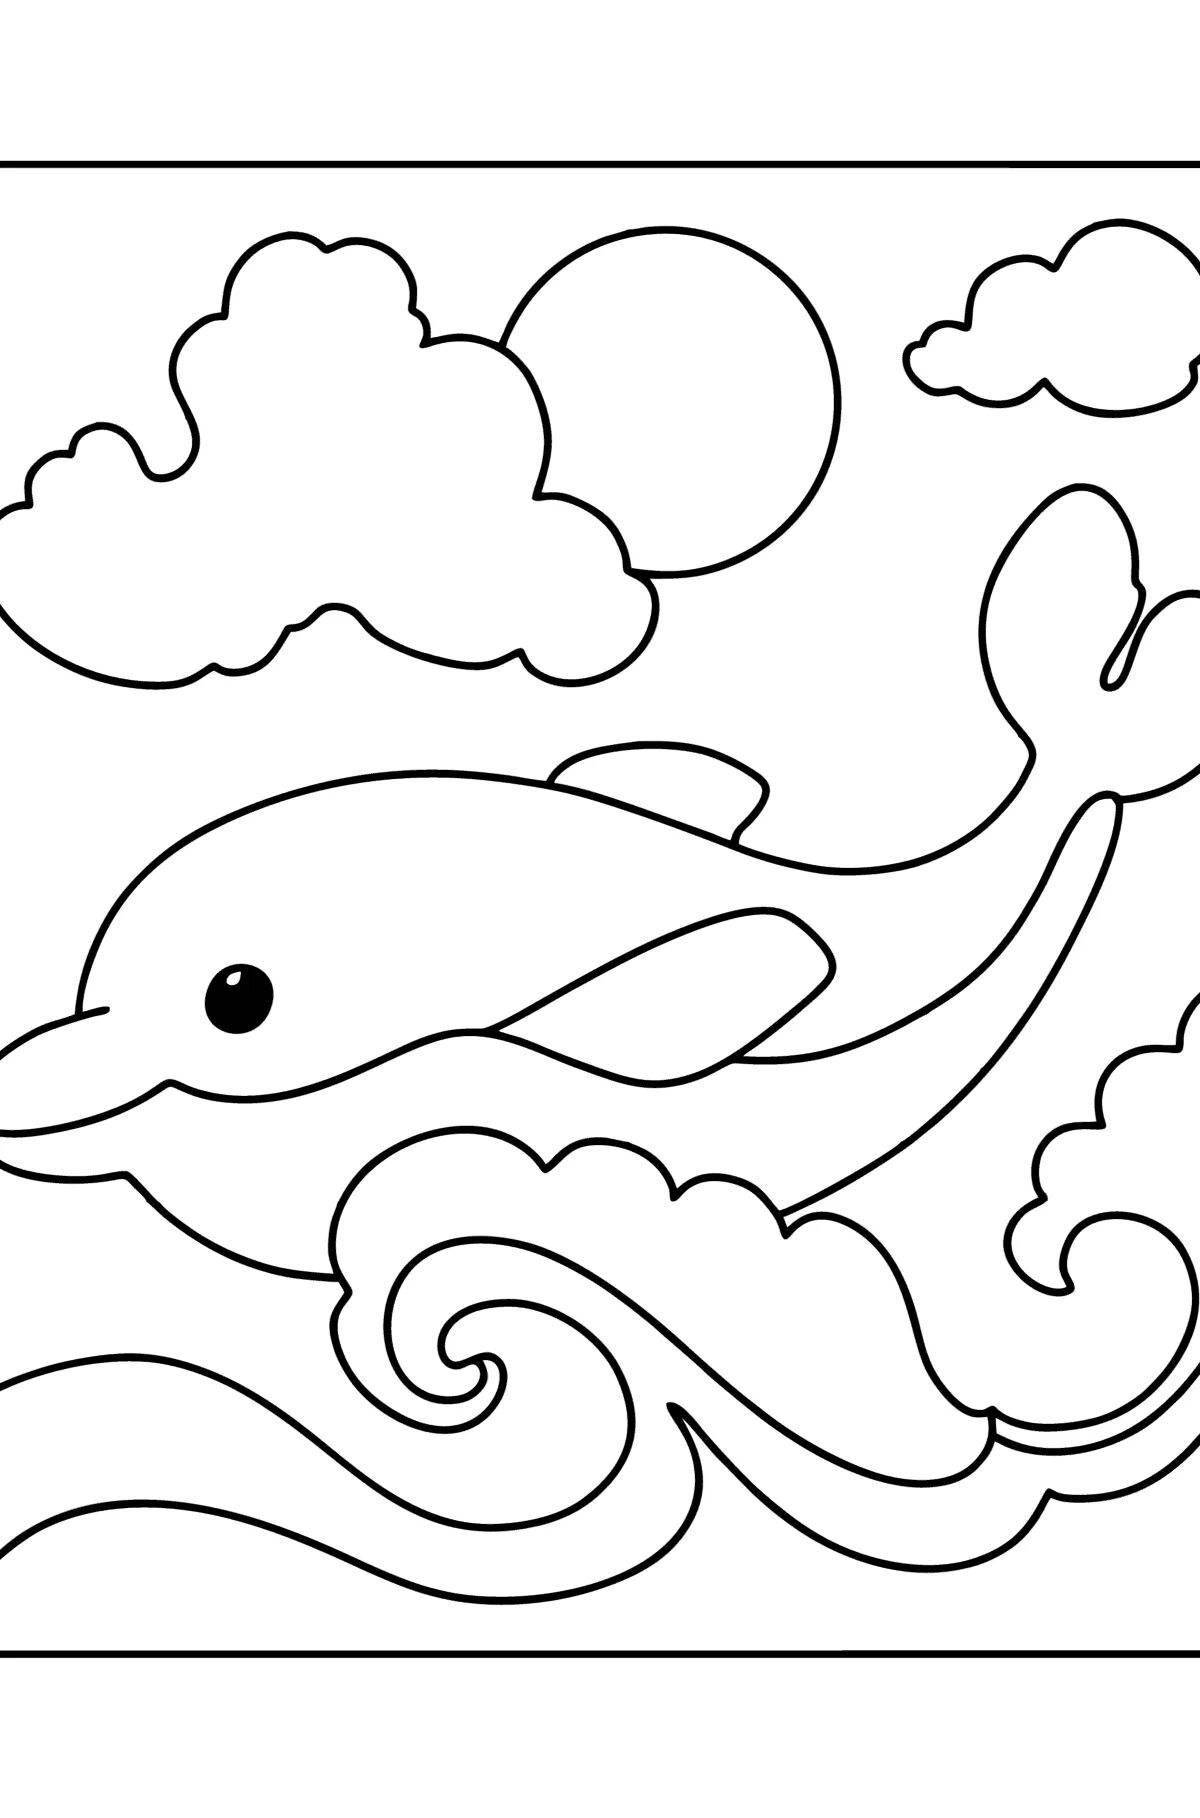 Colouring peaceful dolphin